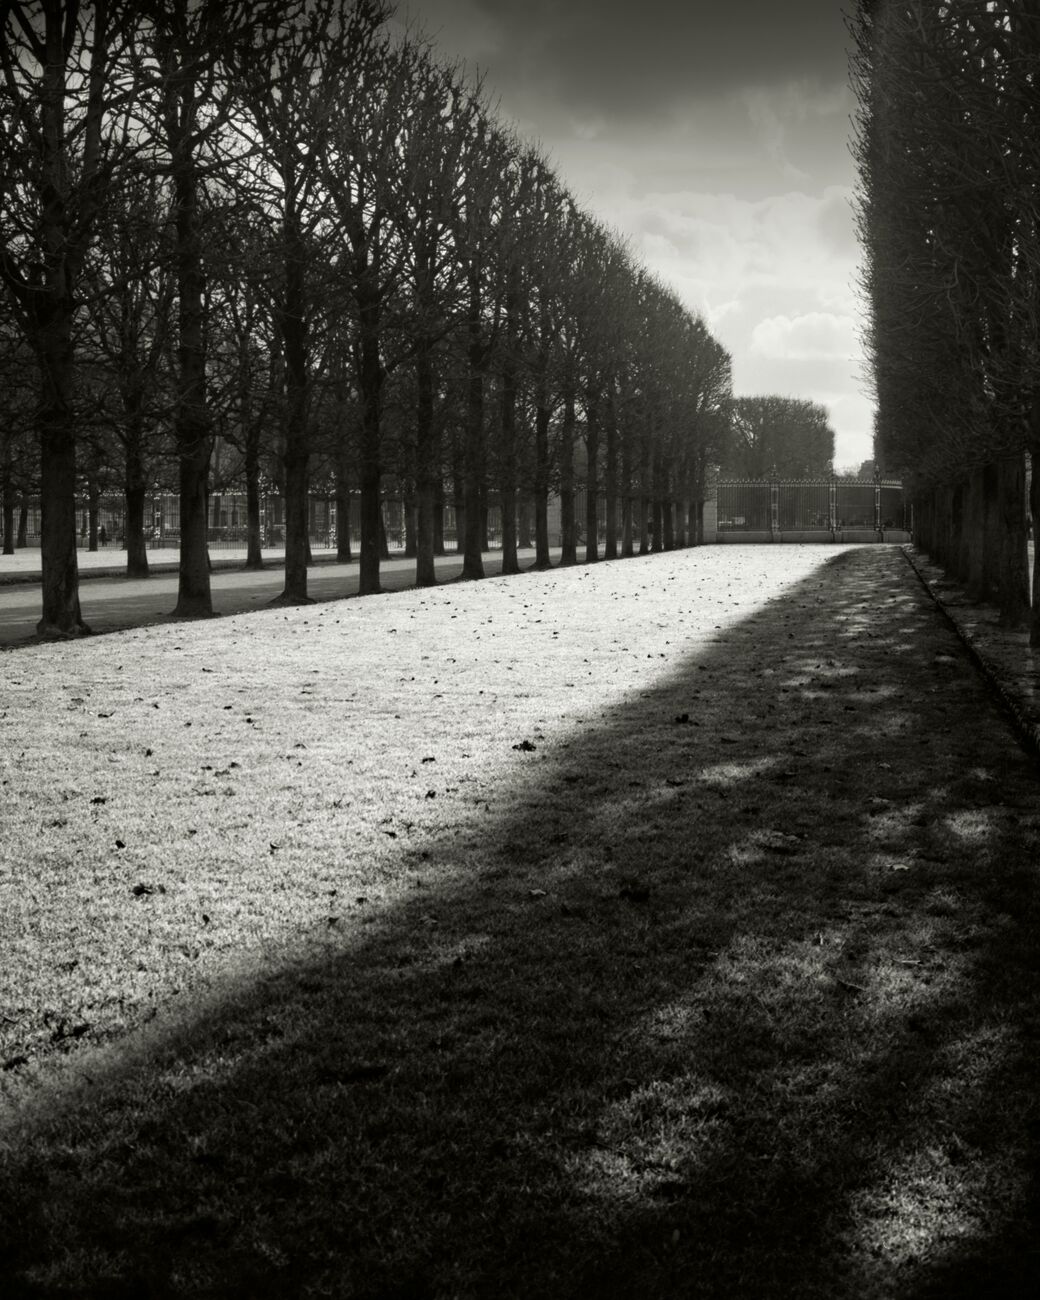 Photograph 22 x 27.6 in, Light over Great Lawn. Ref-11663-5 - Denis Olivier Art Photography